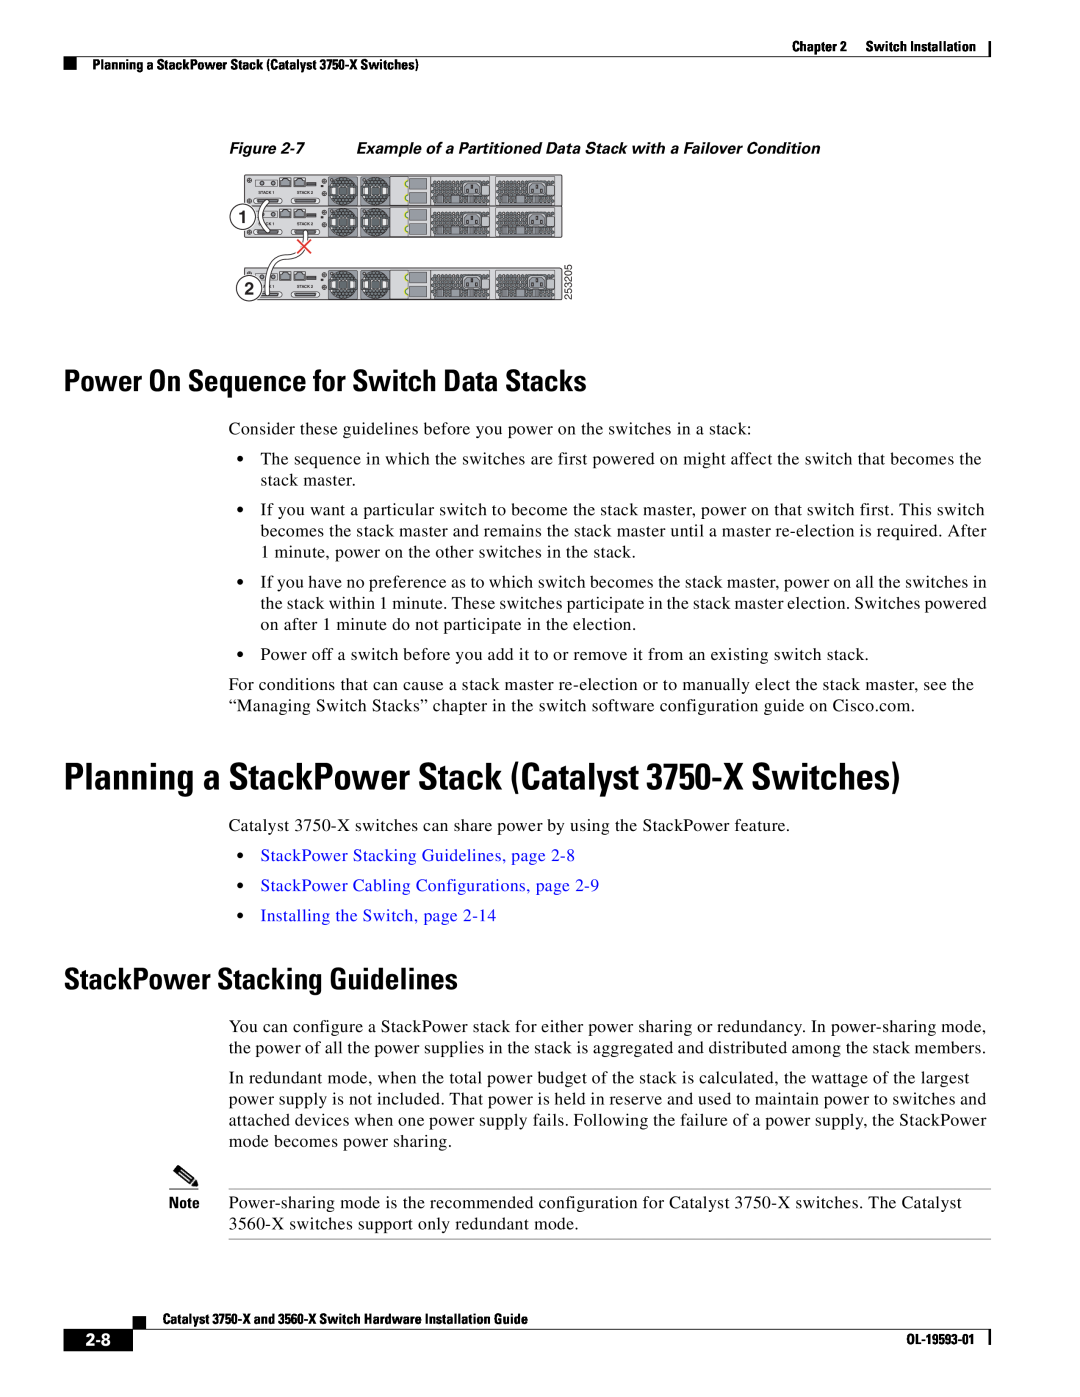 Cisco Systems 3560-X Planning a StackPower Stack Catalyst 3750-X Switches, Power On Sequence for Switch Data Stacks 